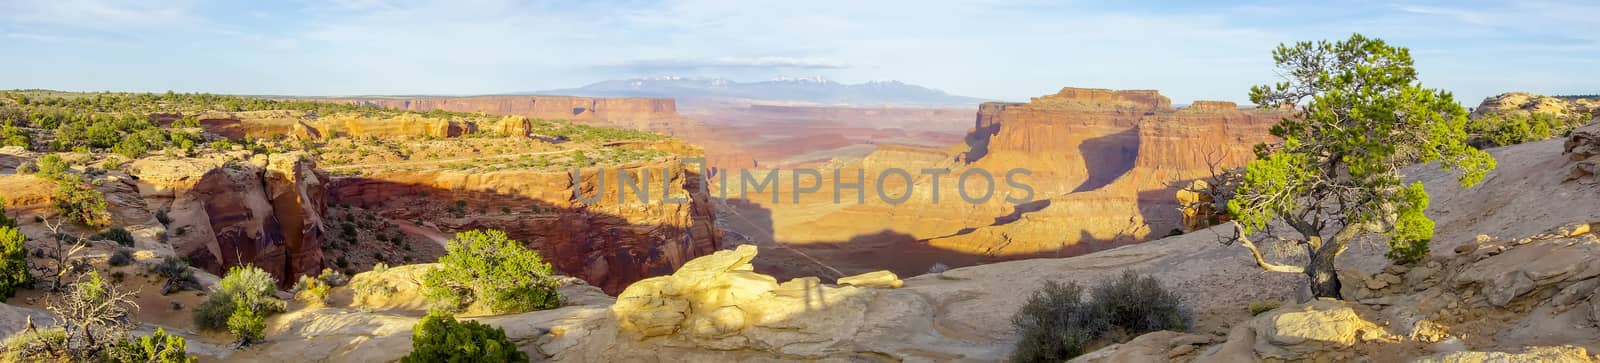 arches national park near delicate arch by digidreamgrafix